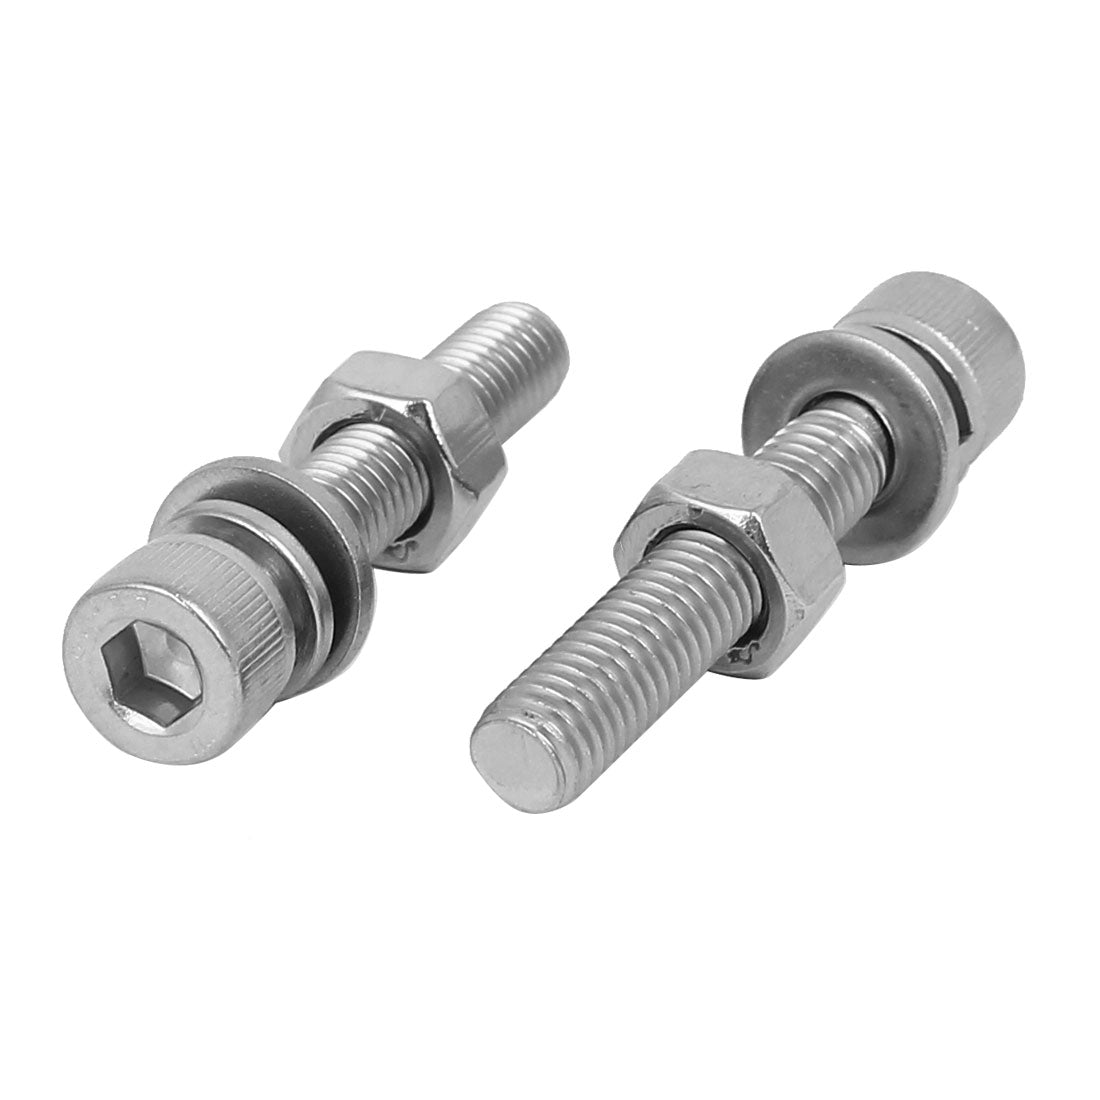 uxcell Uxcell M8 x 45mm 304 Stainless Steel Hex Socket Head Cap Screws Nuts w Washers 5 Sets